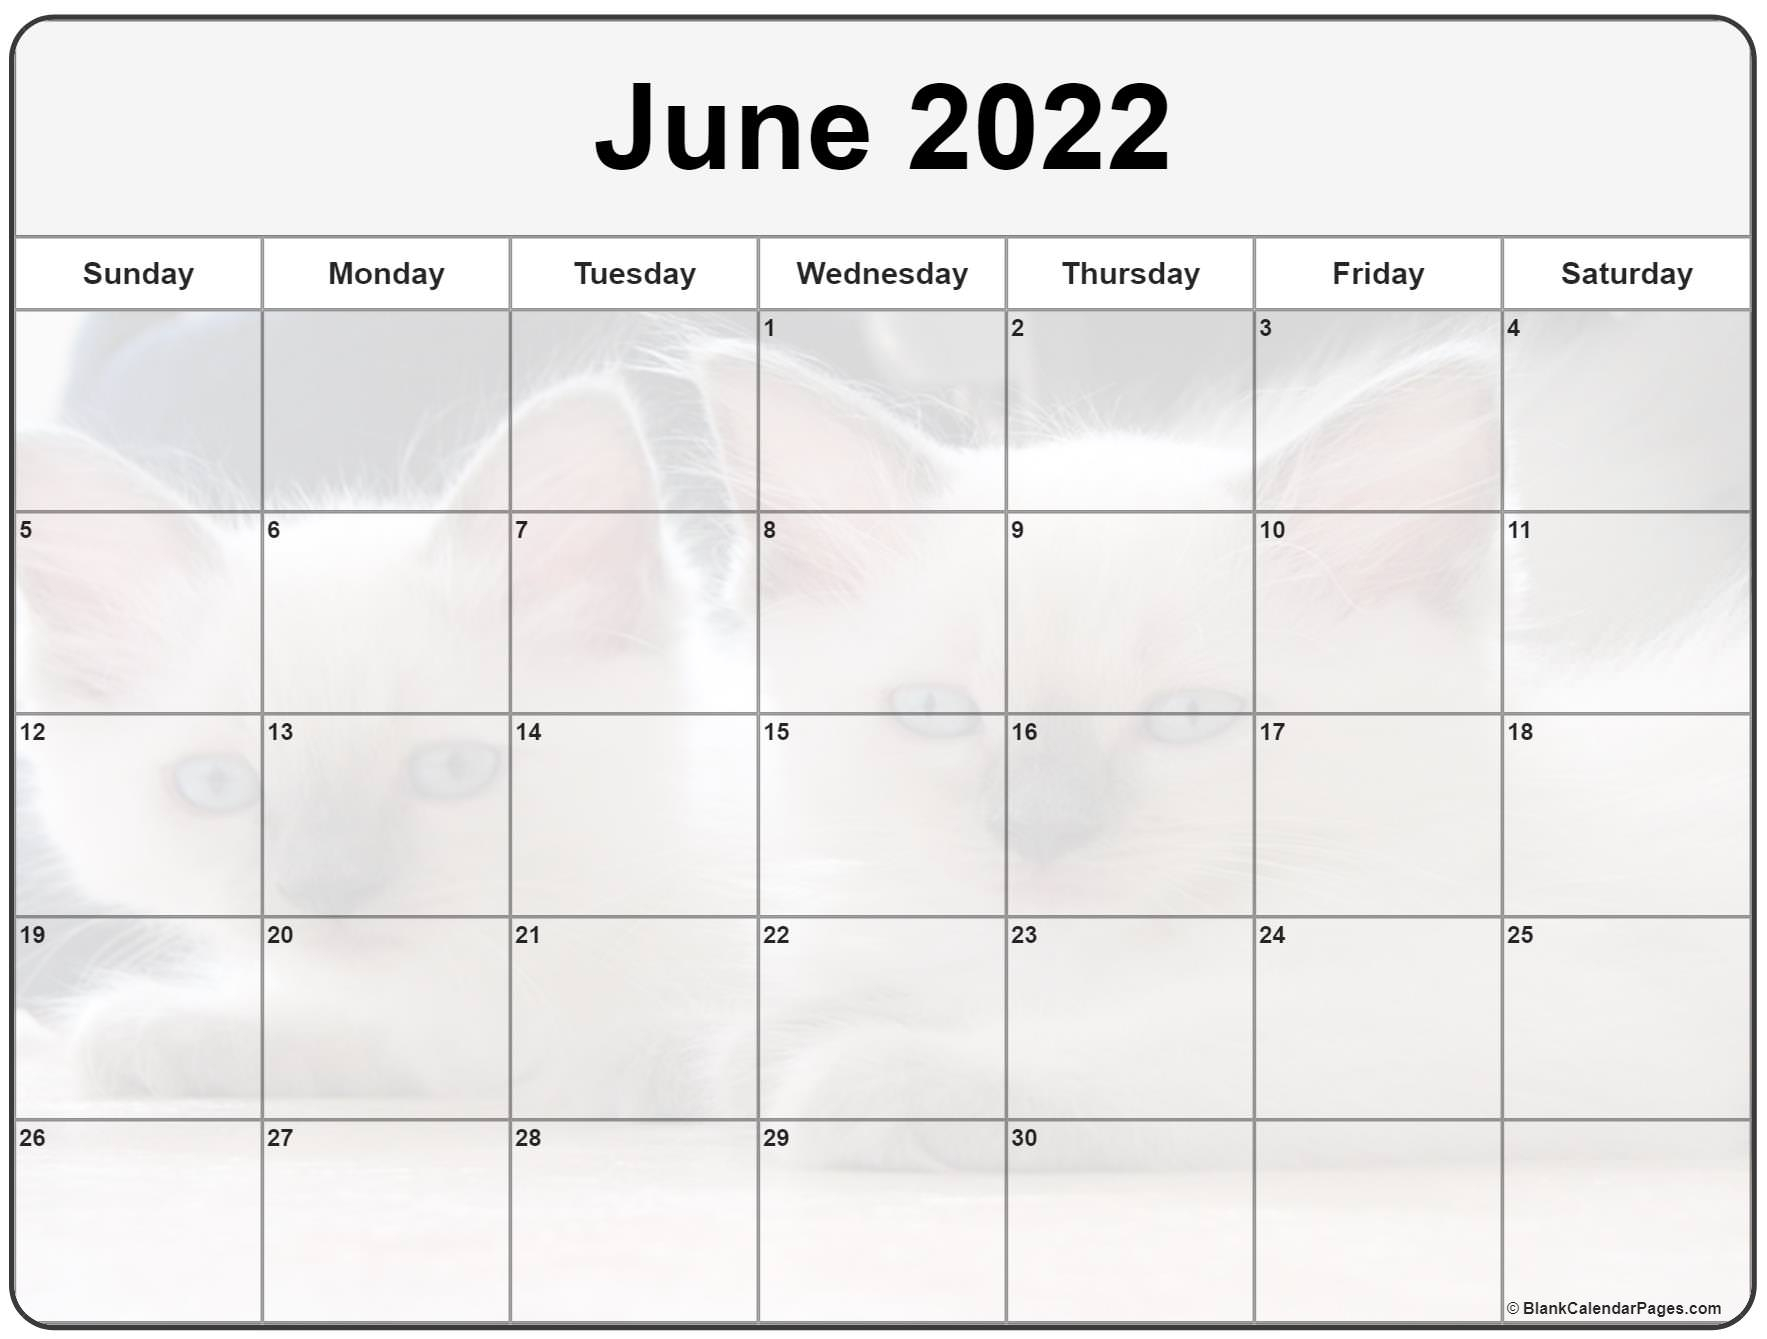 Collection Of June 2022 Photo Calendars With Image Filters.